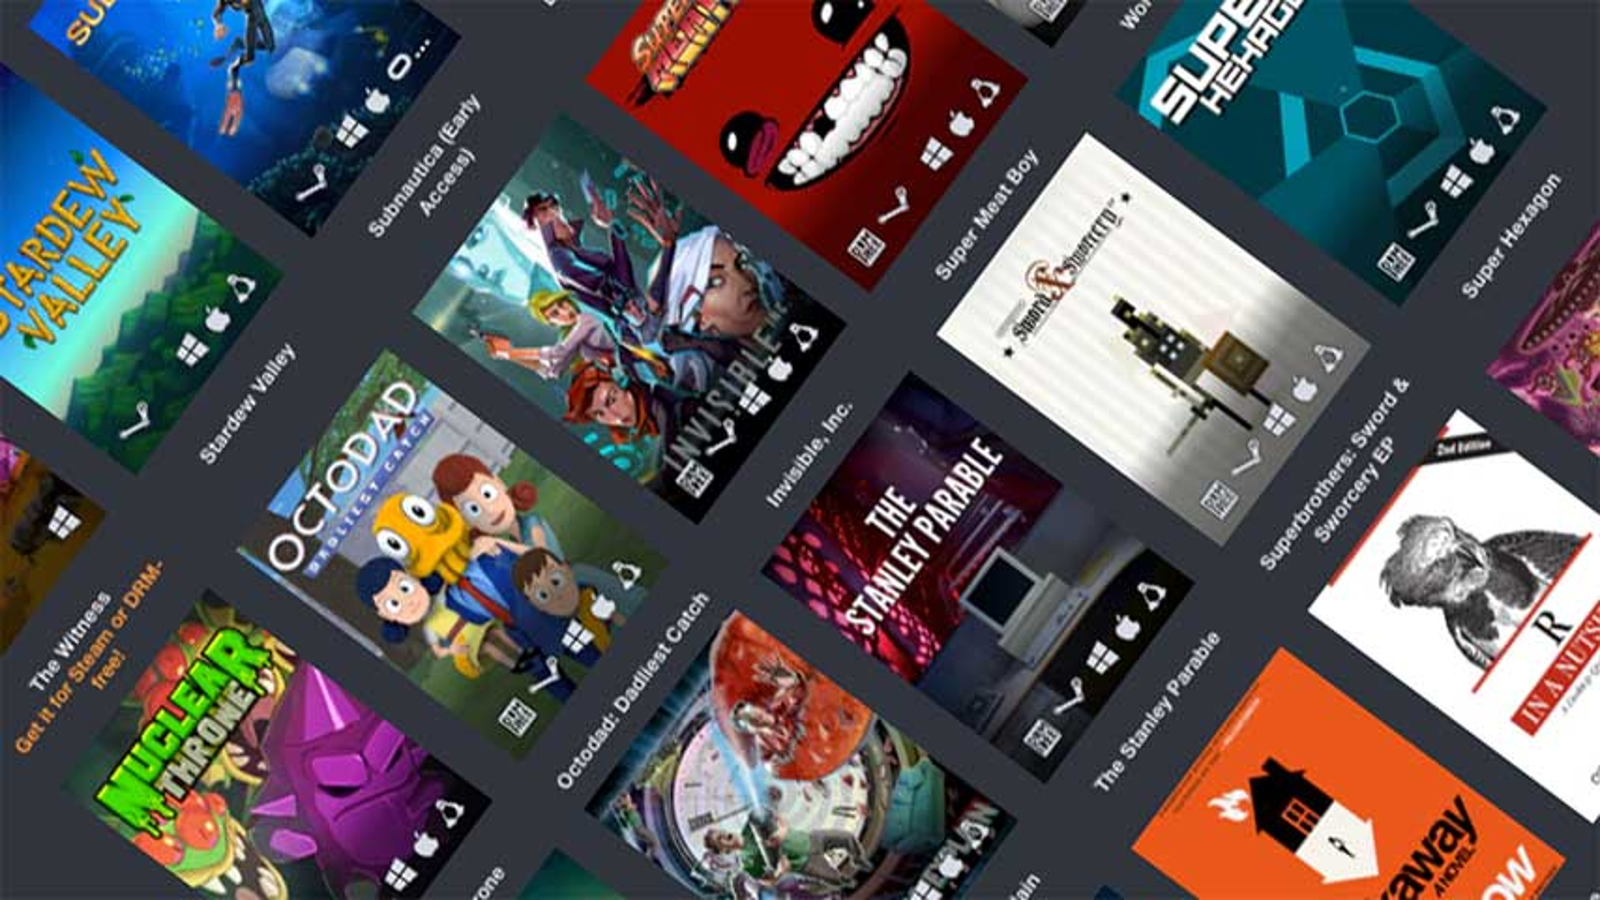 New titles added as Humble Freedom Bundle raises $4.2 million [Updated]